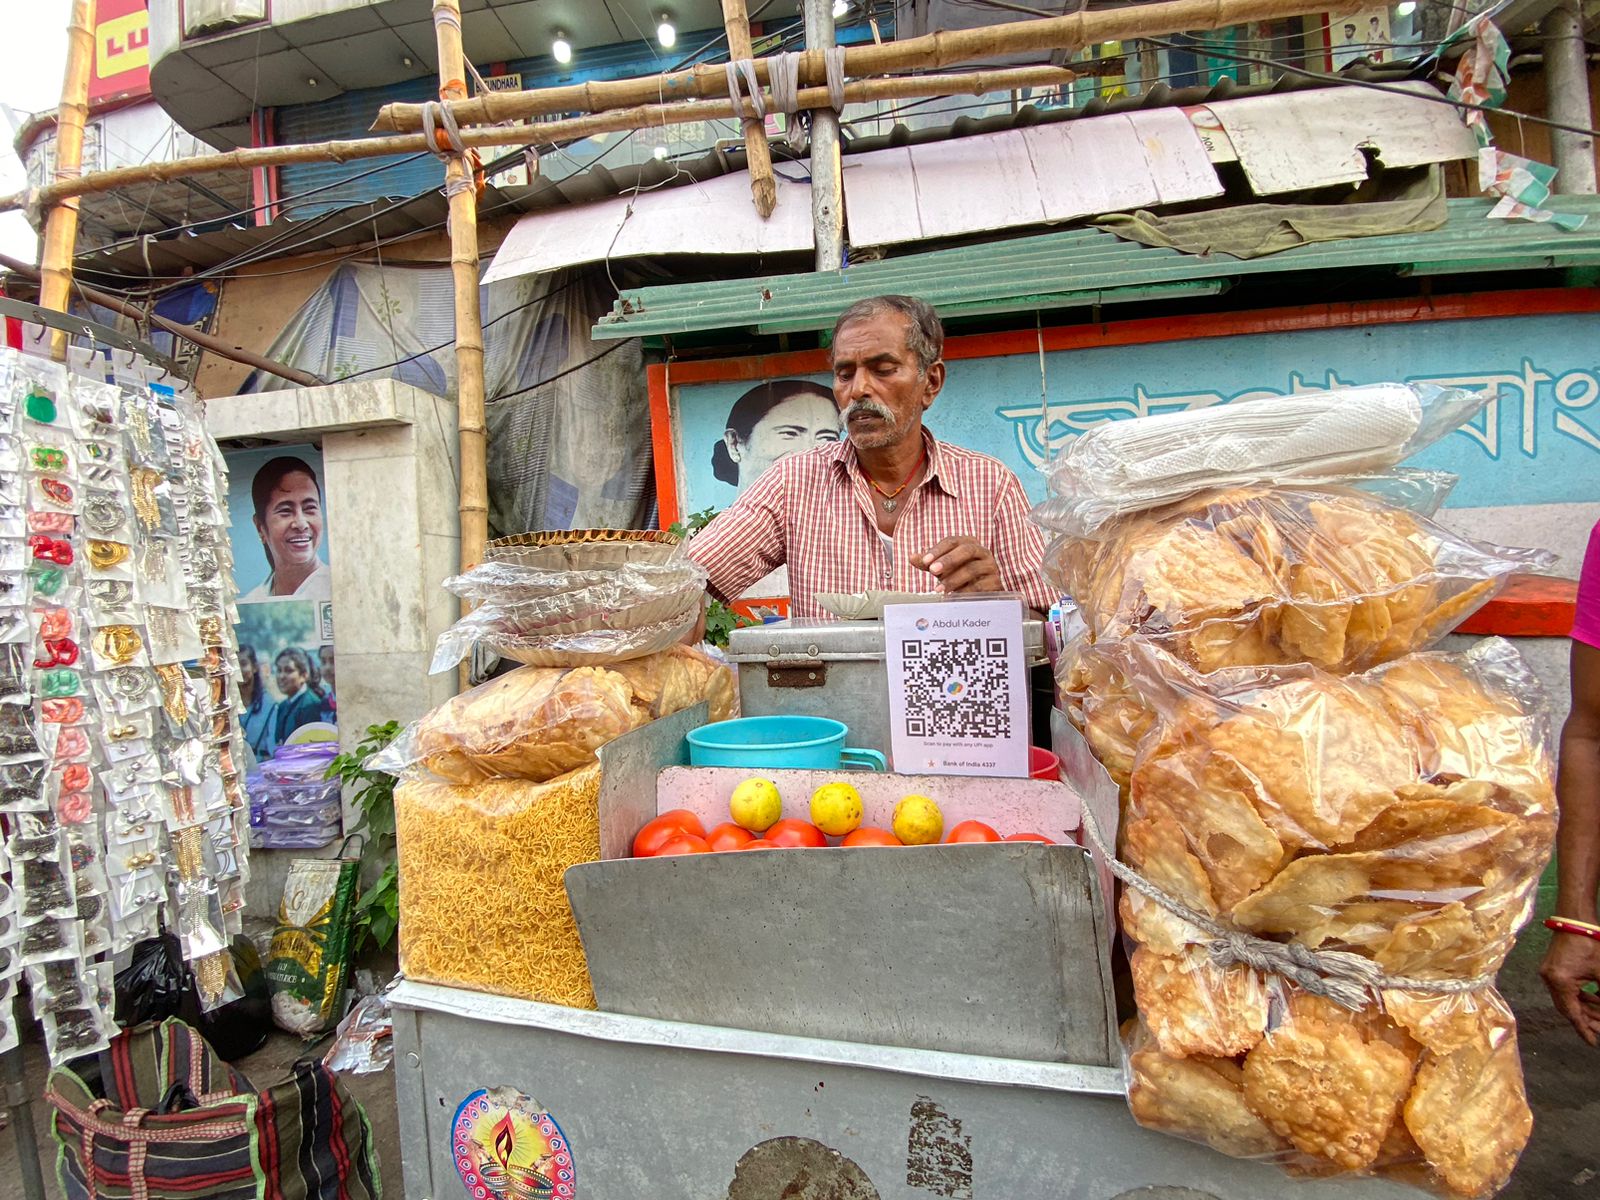 Avishek/Mitra For the Oglethorpe Echo Sukhdev, a papri chat (a popular street food) seller in South Kolkata's Garianhat area, said UPI has helped him run his business, especially when more people are using apps on their mobile phones to buy products. 